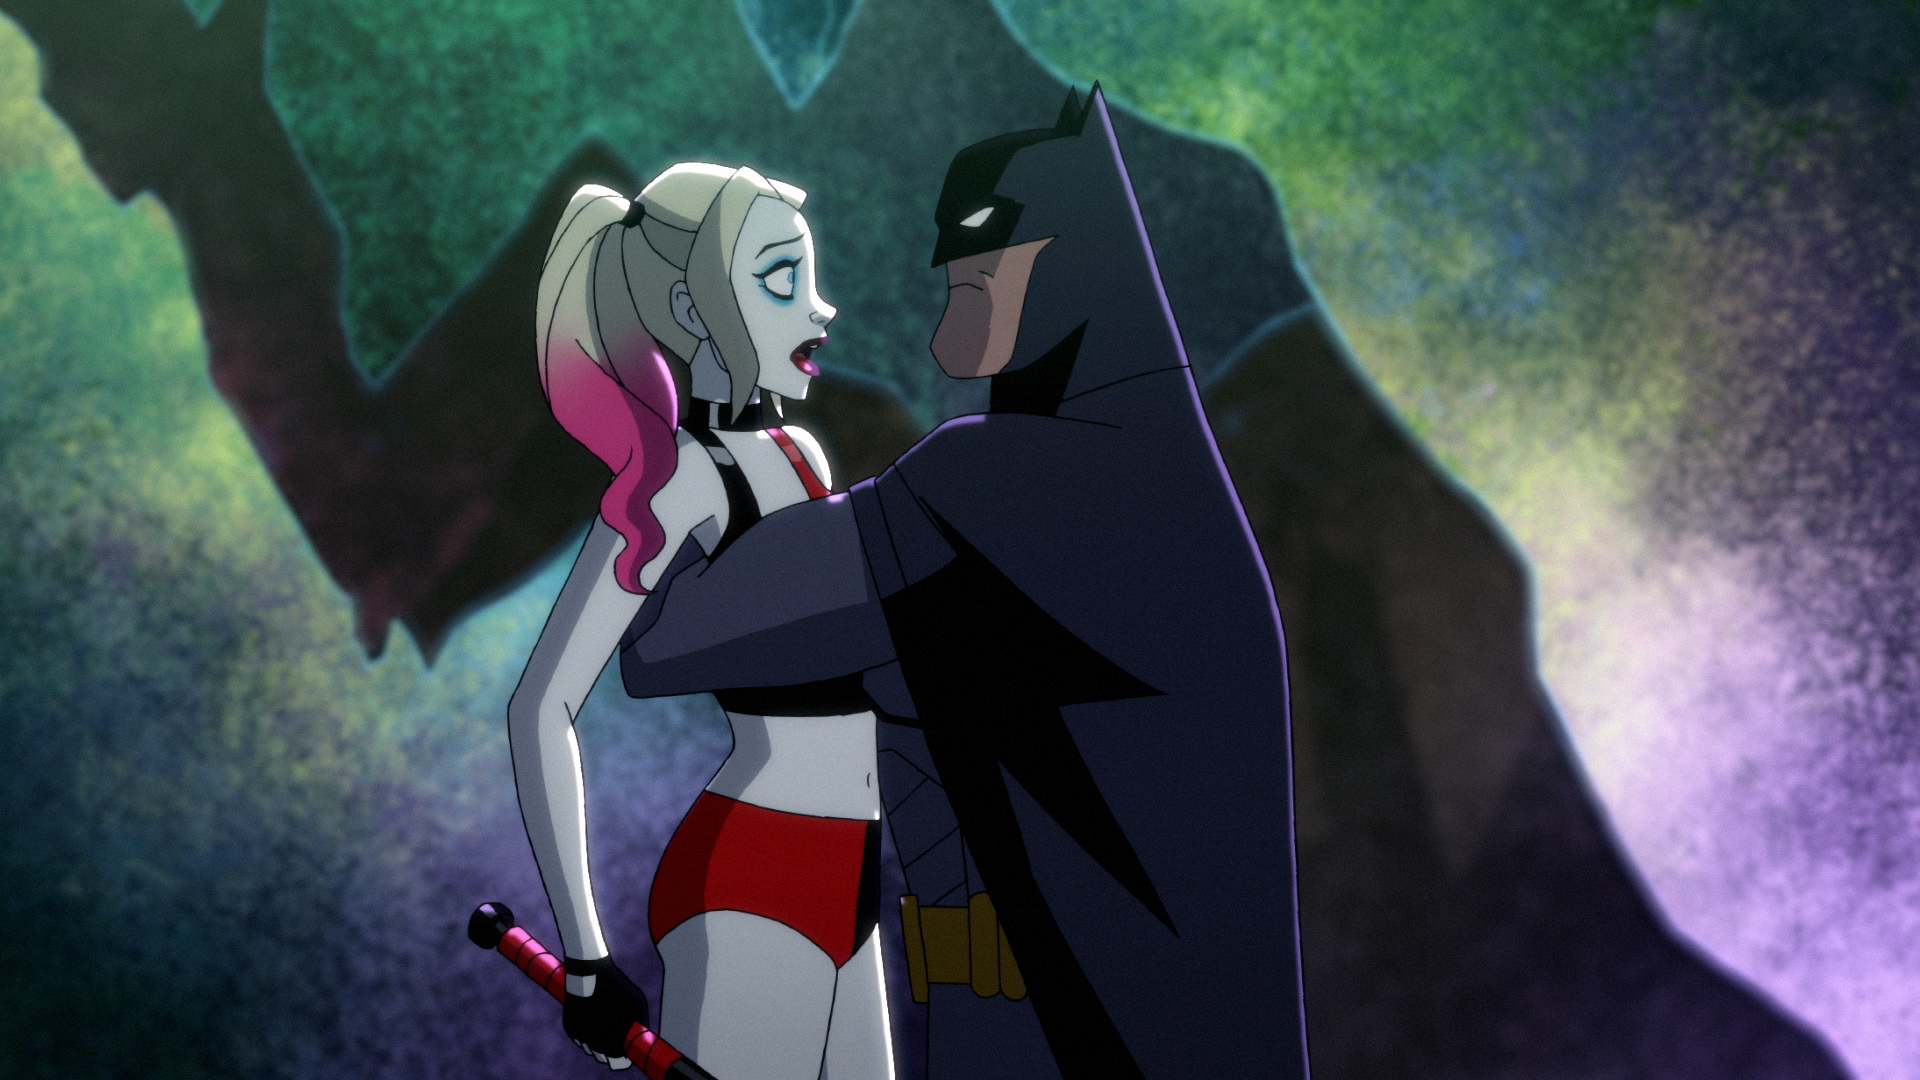 DC Strict On Batman’s Sex Life According To Harley Quinn EP/Co-Creator